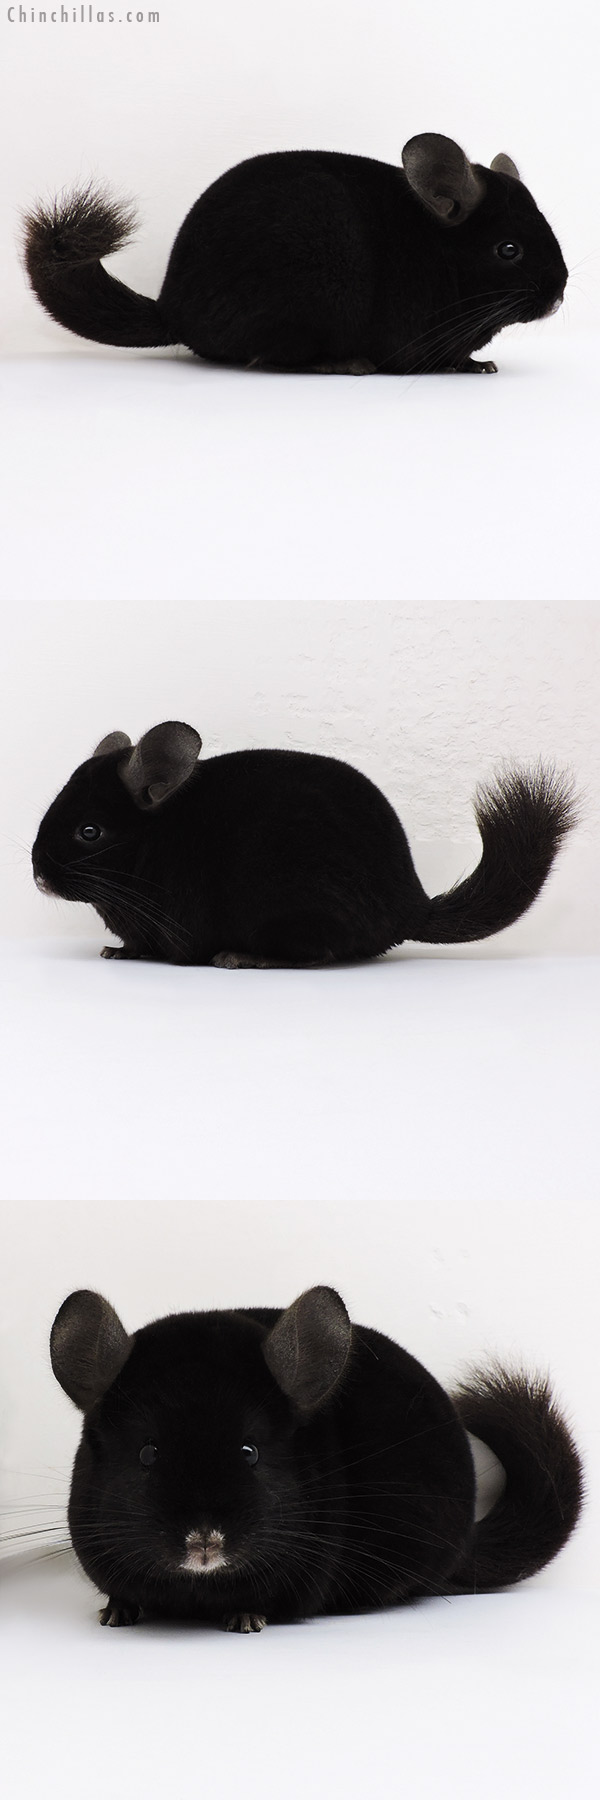 Chinchilla or related item offered for sale or export on Chinchillas.com - 16281 Premium Production Quality Ebony Female Chinchilla